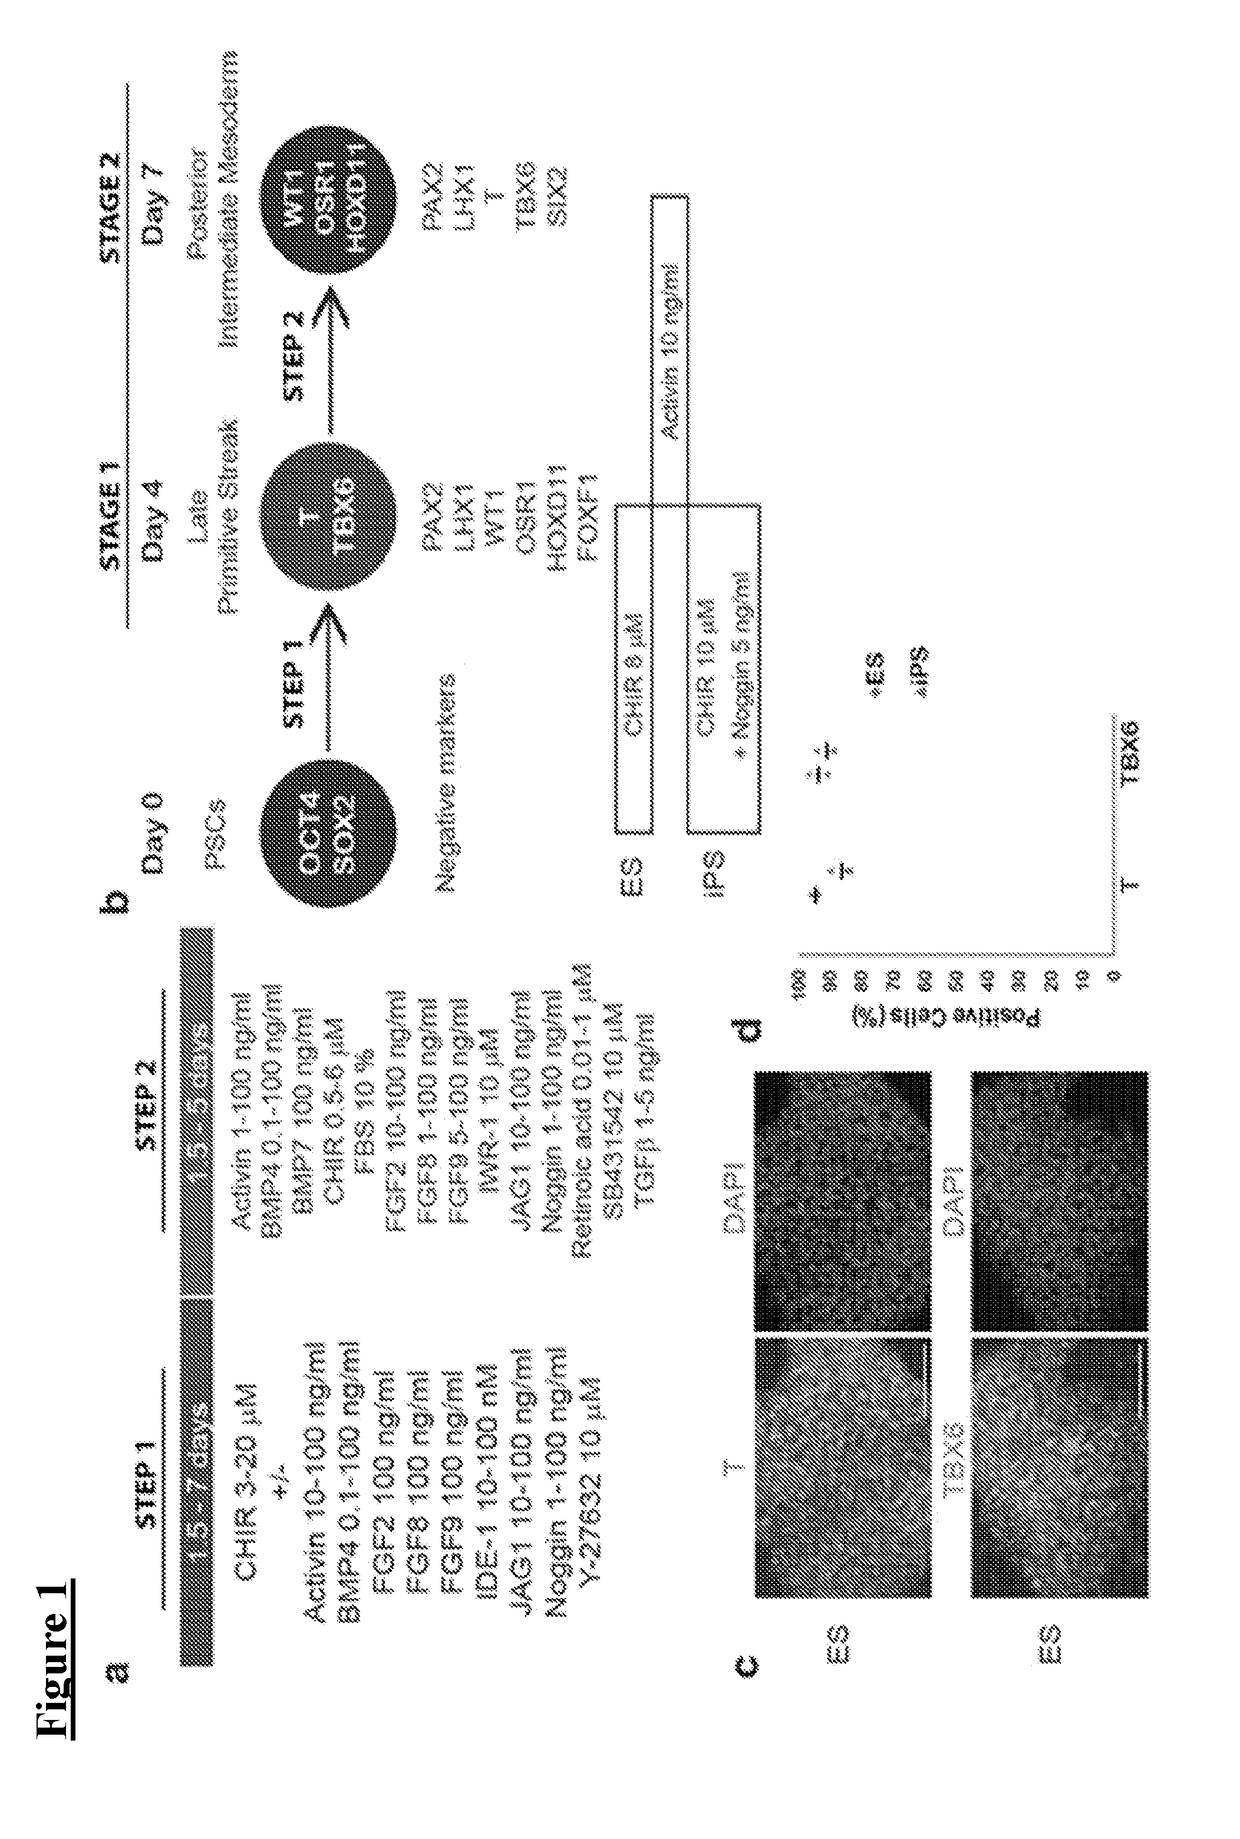 Methods of generating nephrons from human pluripotent stem cells